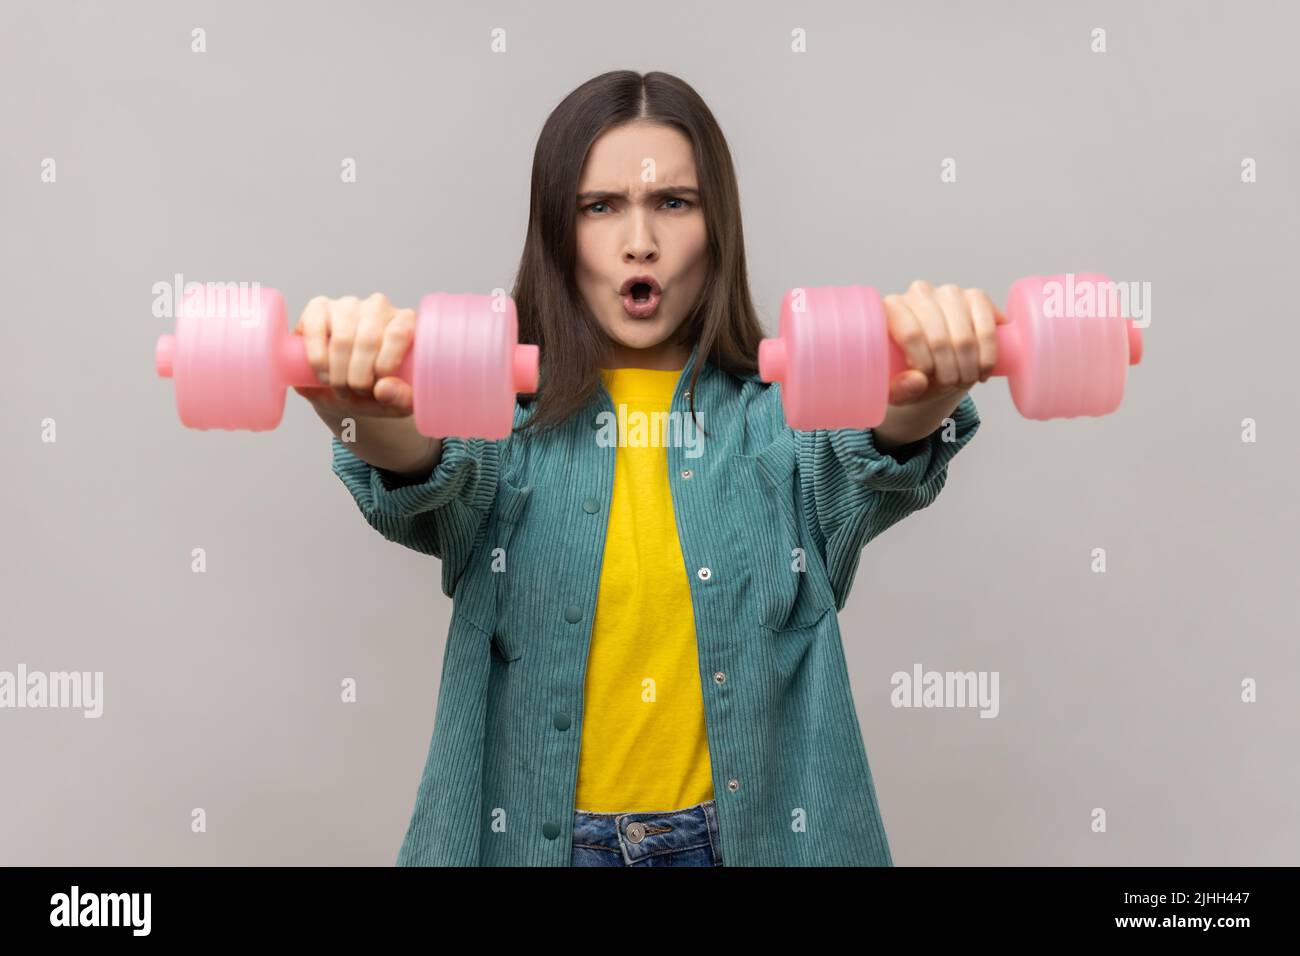 Portrait of woman raising pink dumbbells with effort and looking at camera, pumping up muscles, healthy lifestyle, wearing casual style jacket. Indoor studio shot isolated on gray background. Stock Photo